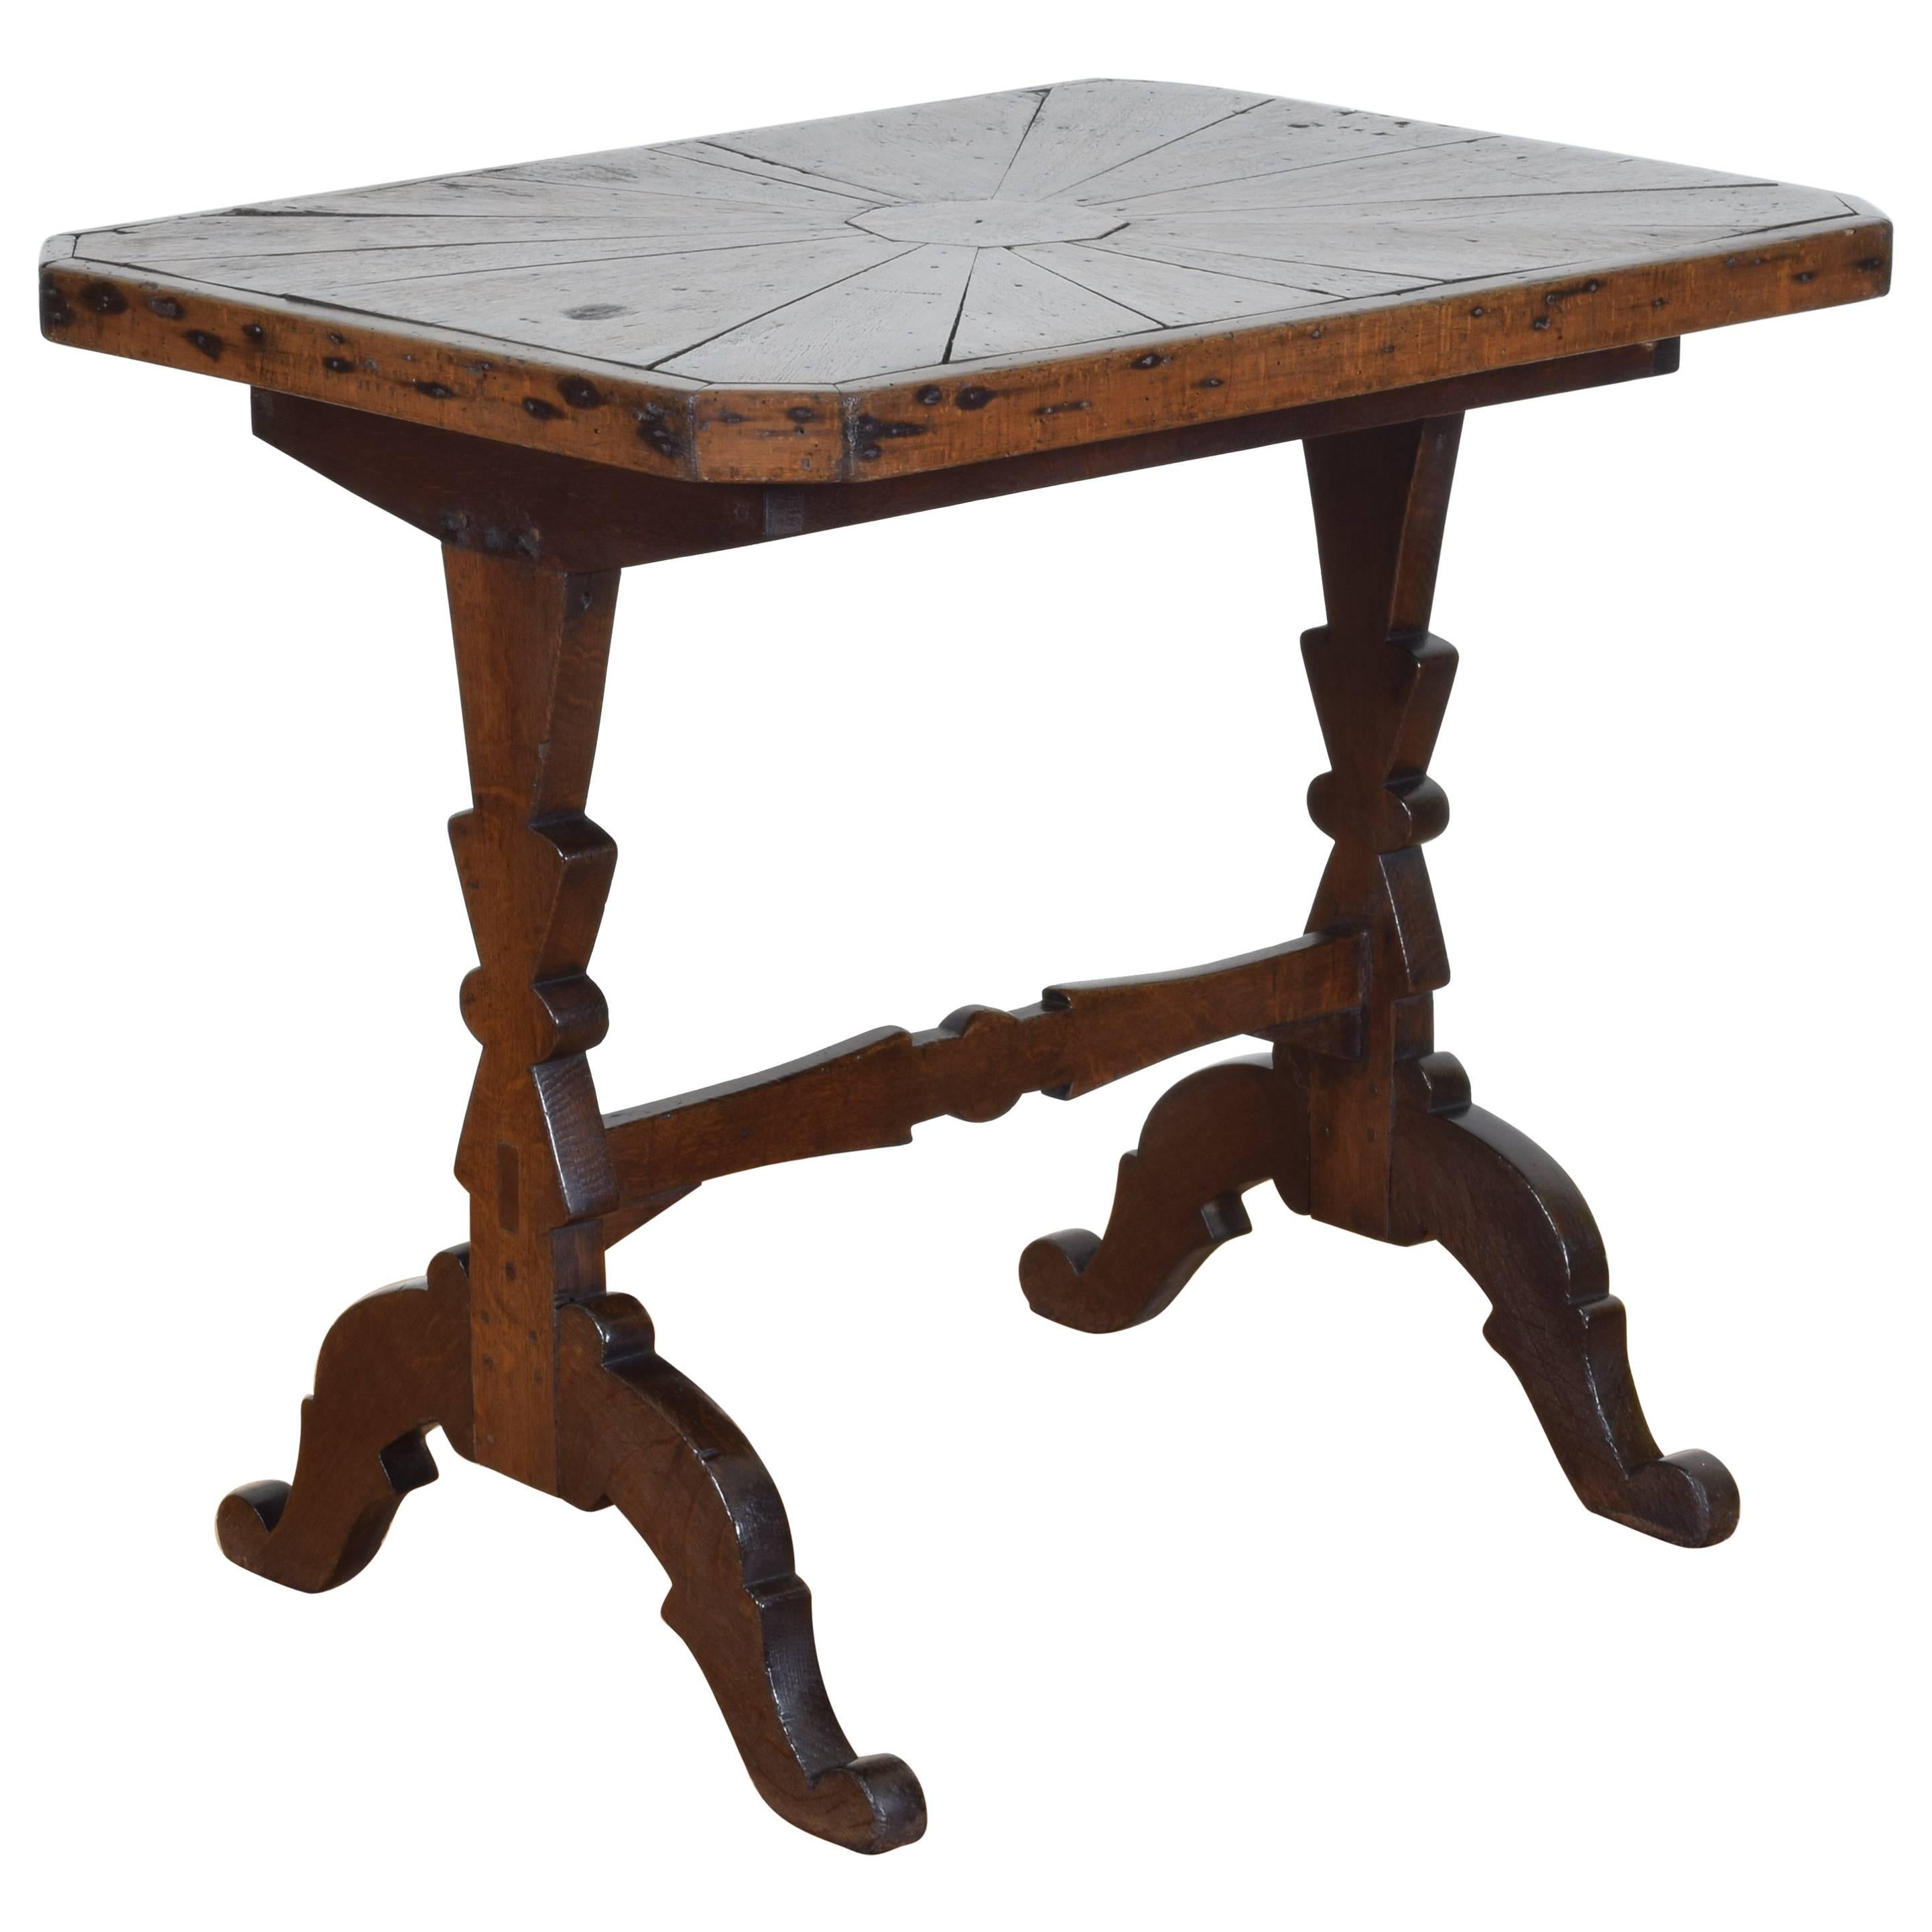 French Art Popular Style Oak Veneered Table from the Restauration Period